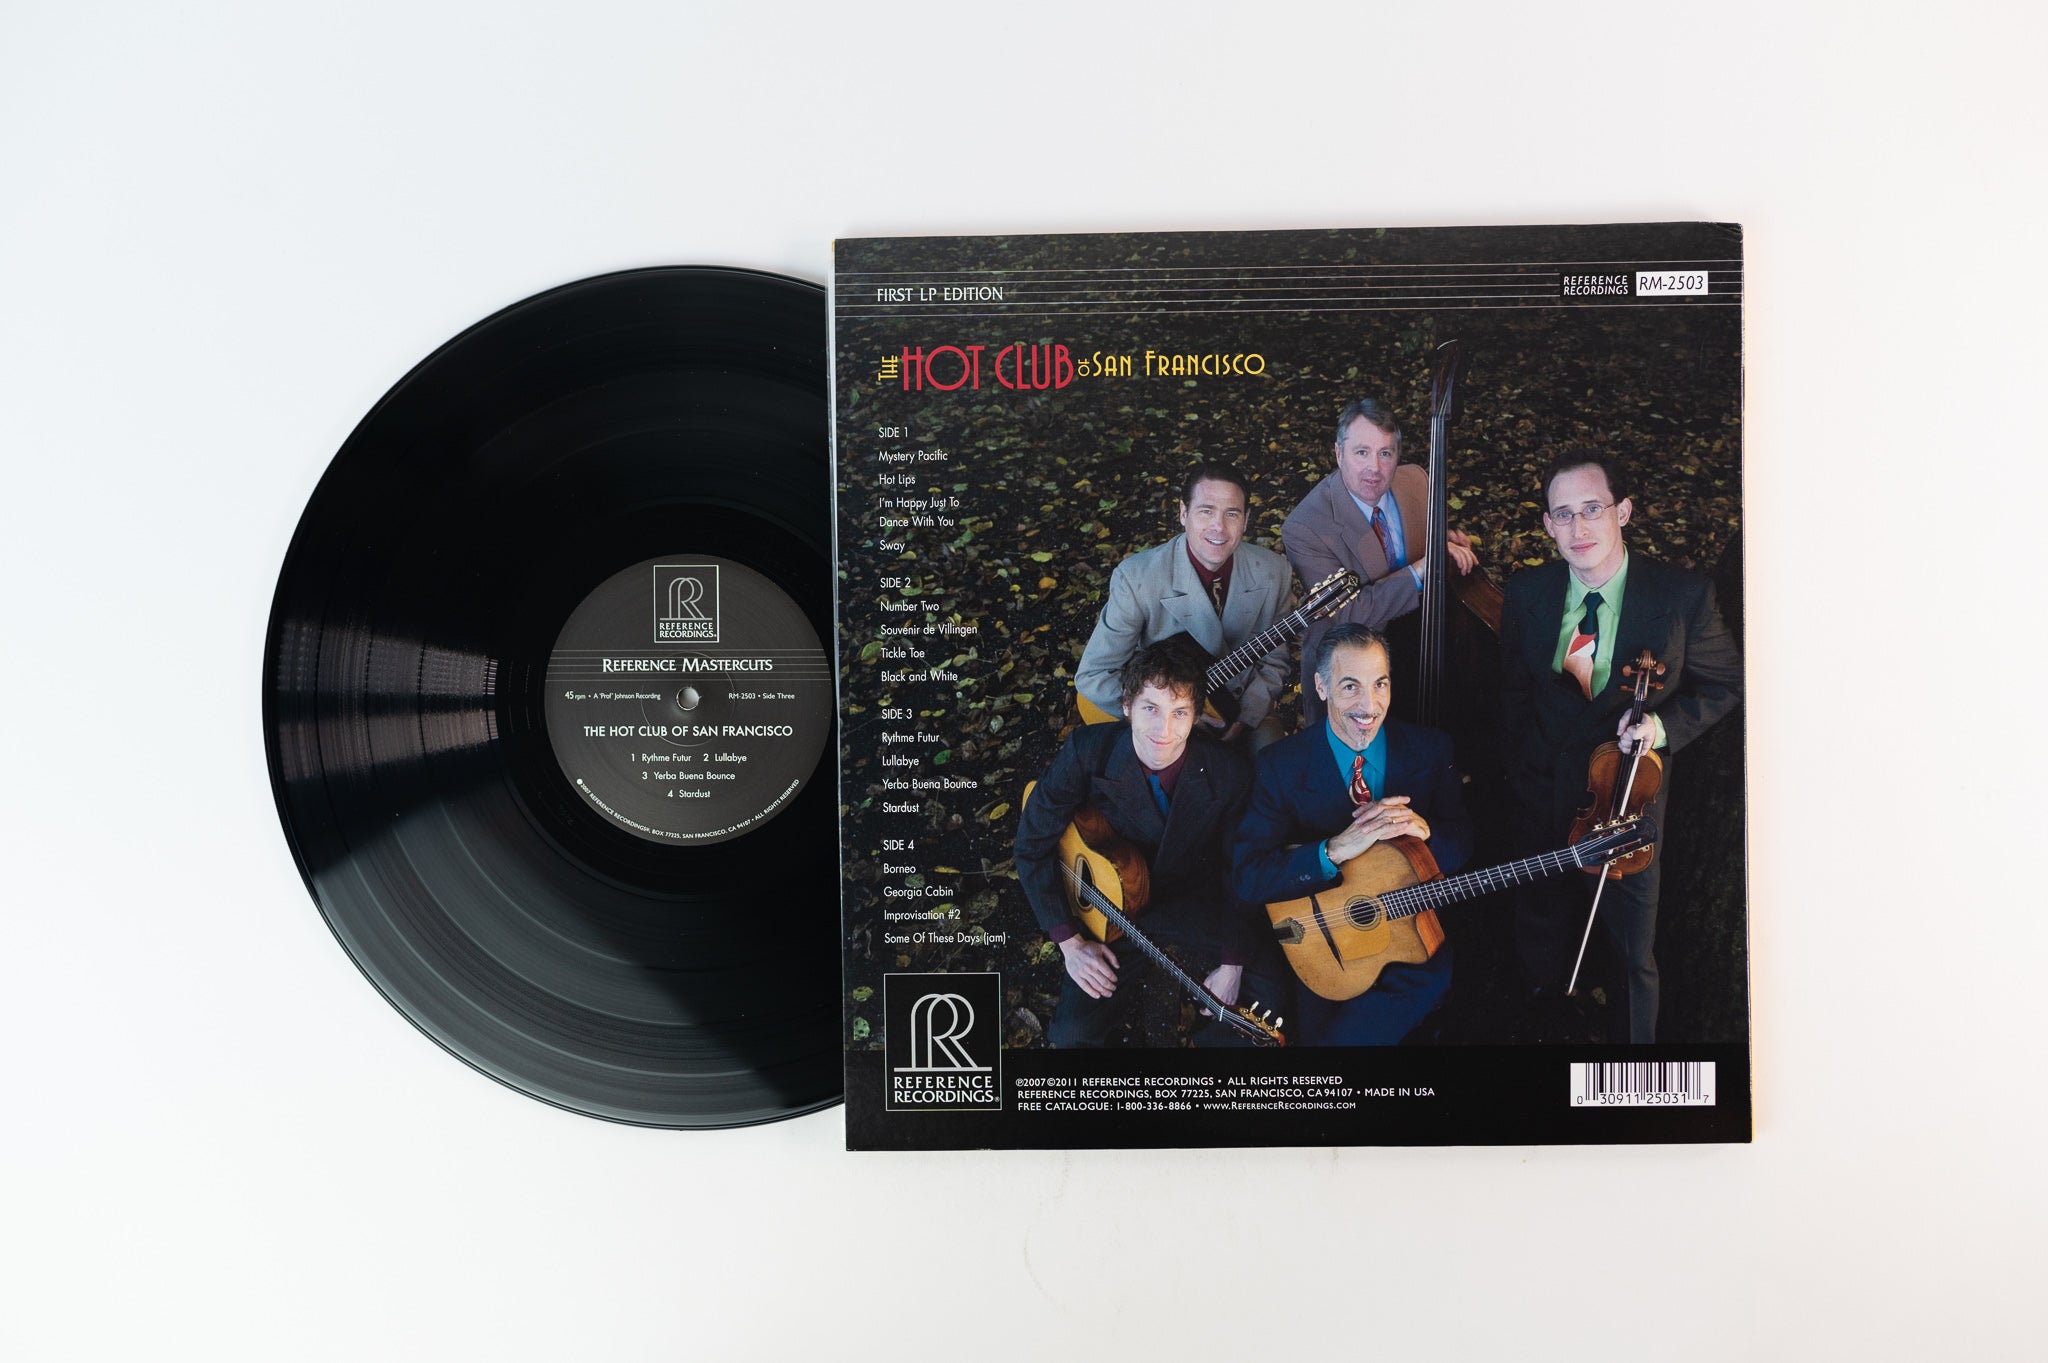 The Hot Club Of San Francisco with Dave Grisman - Yerba Buena Bounce on Reference Recordings 200 Gram